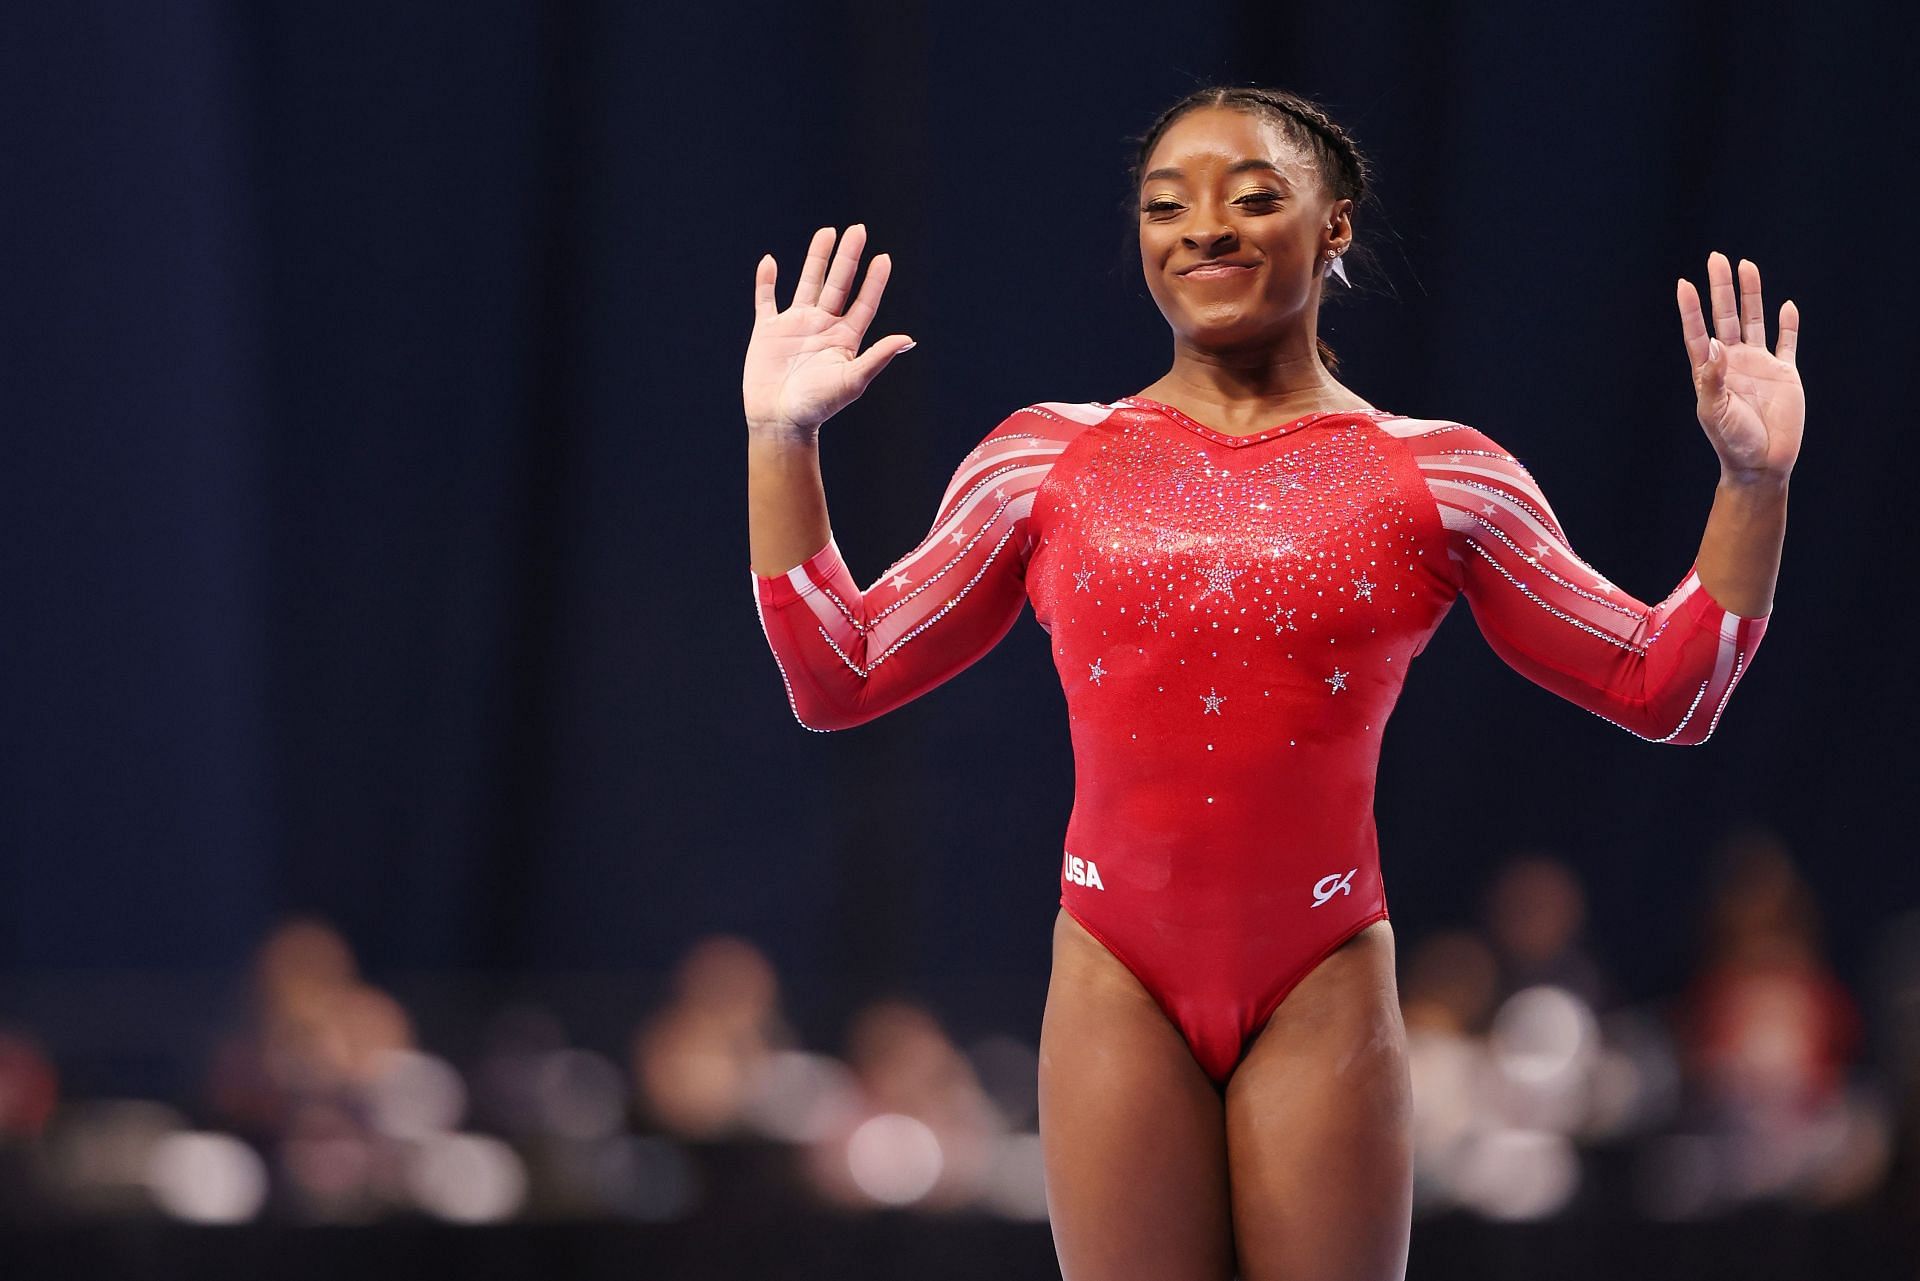 Simone Biles competes in the floor exercise during the Women&#039;s competition of the 2021 U.S. Gymnastics Olympic Trials at America&rsquo;s Center on June 27, 2021 in St Louis, Missouri. (Photo by Jamie Squire/Getty Images)